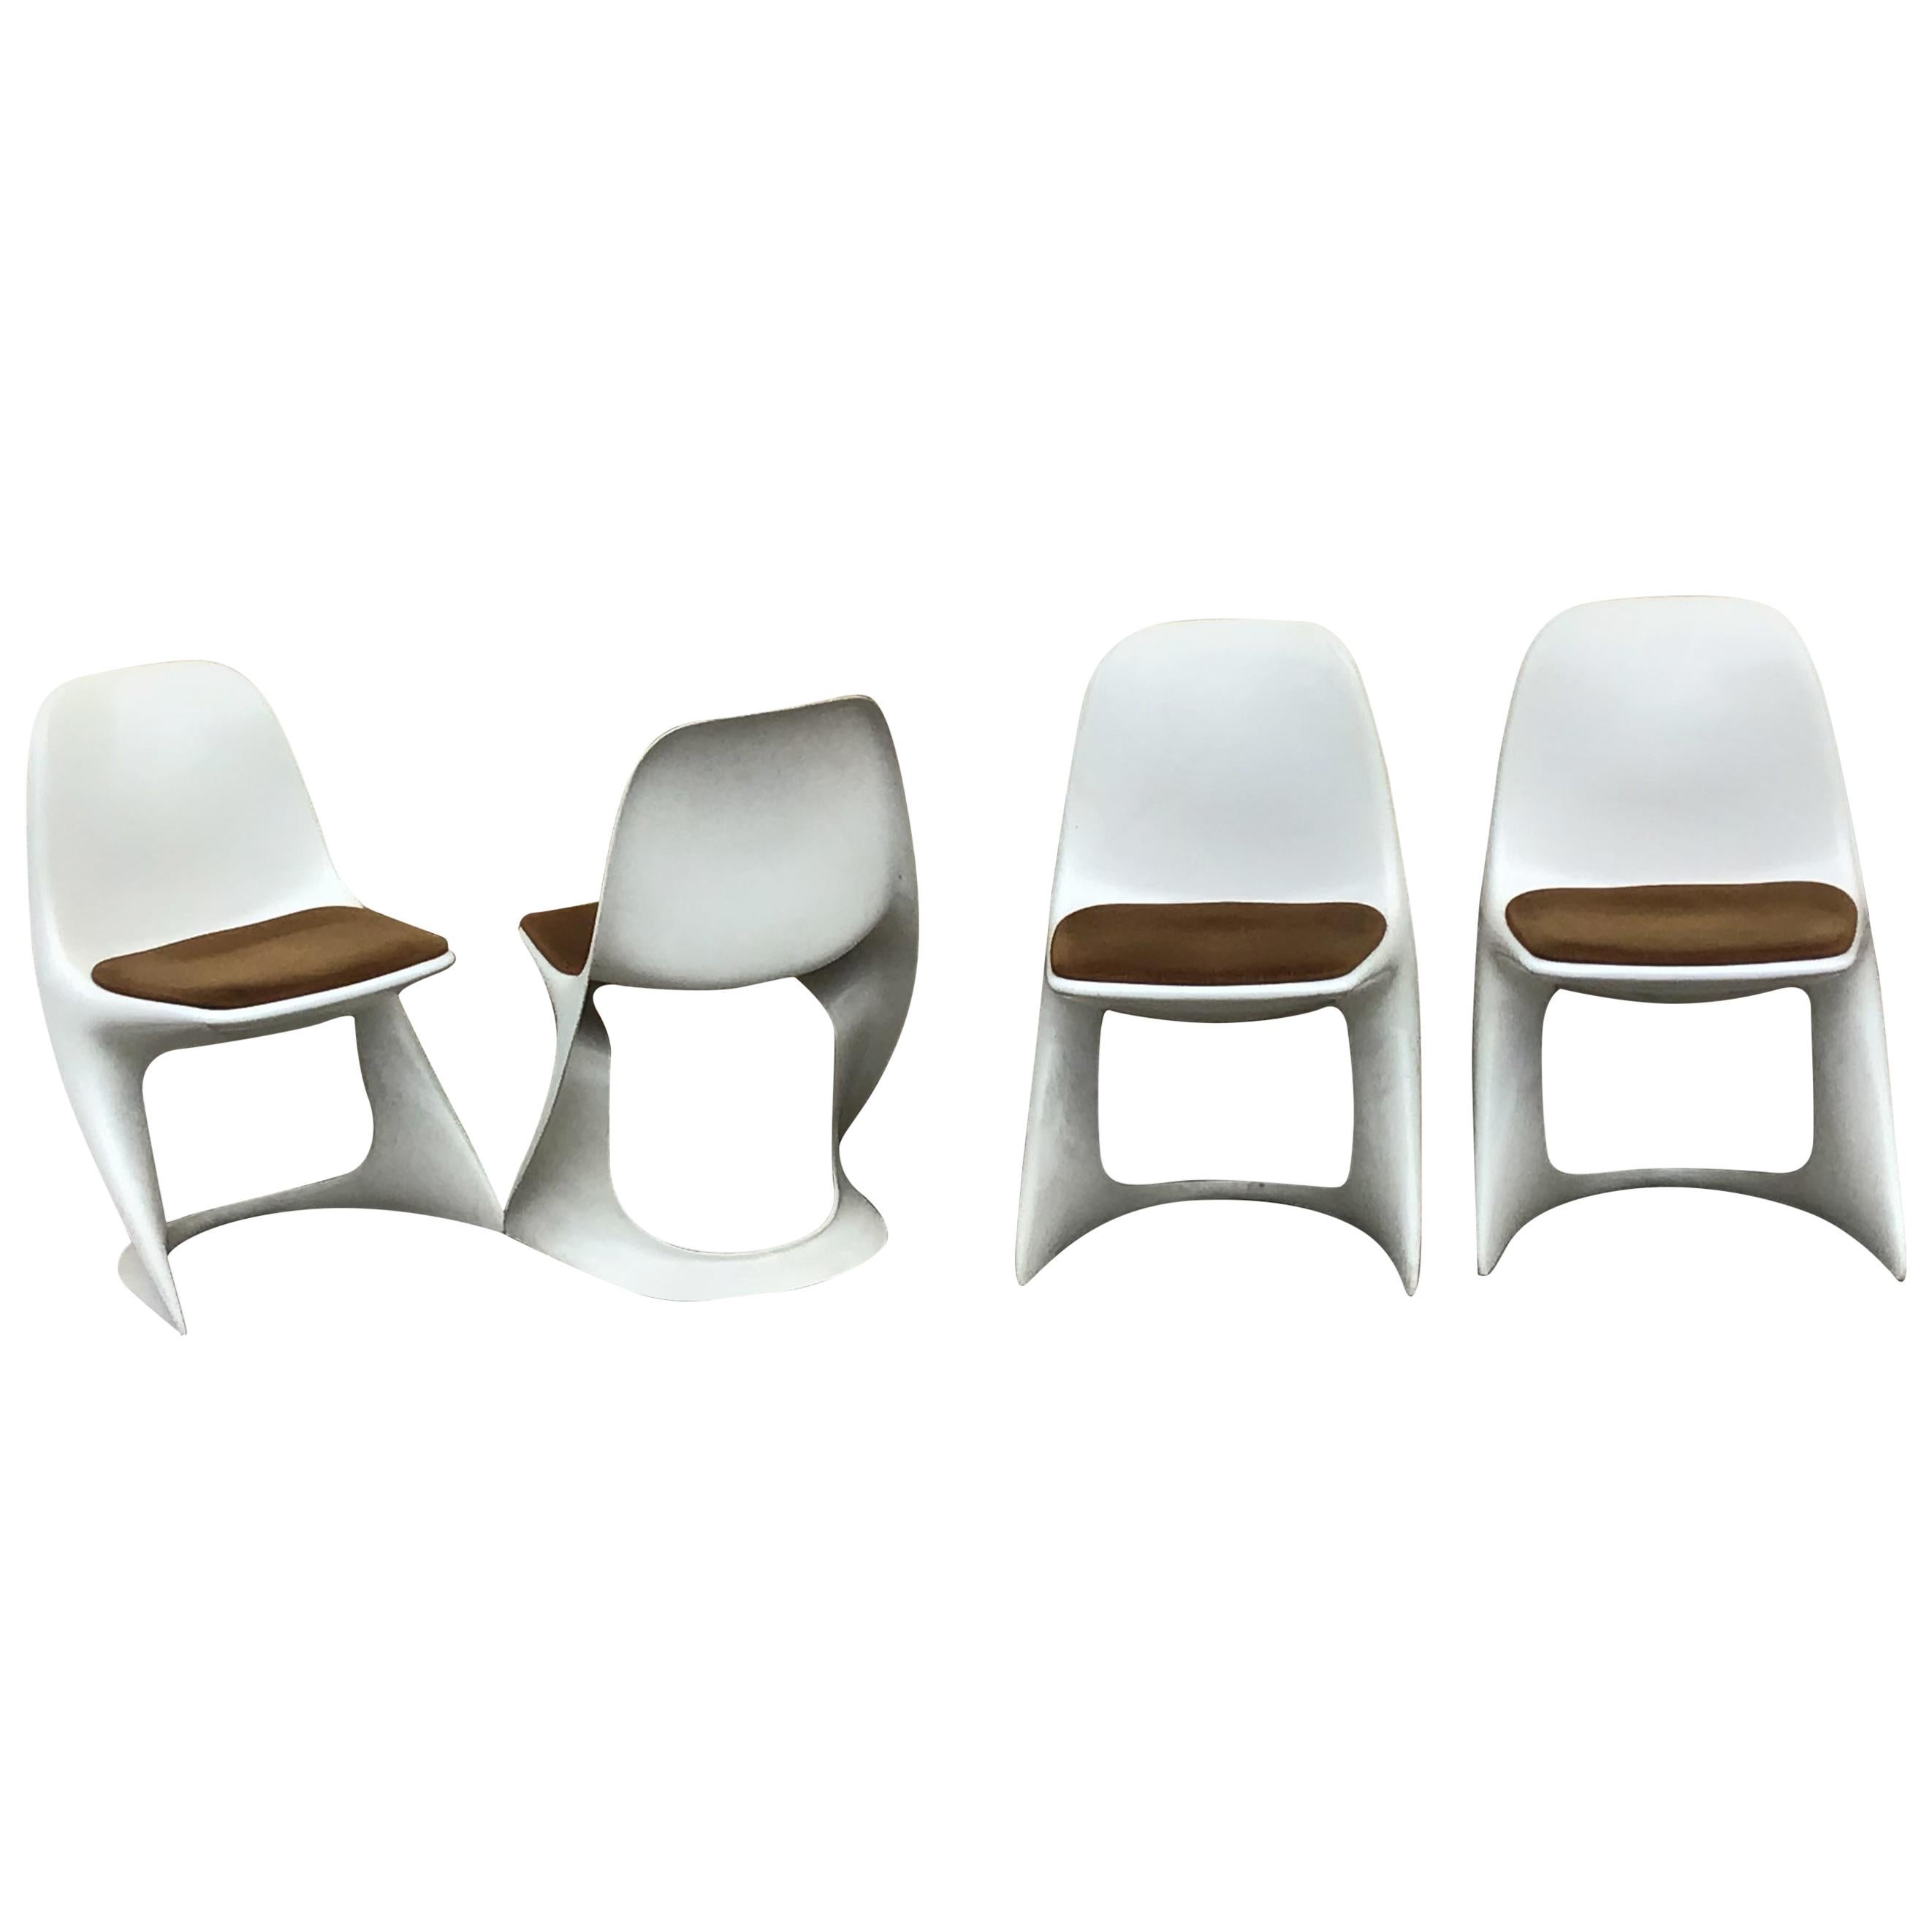 Casalino Chairs by Alexander Begge for Casala, 1970s Chairs